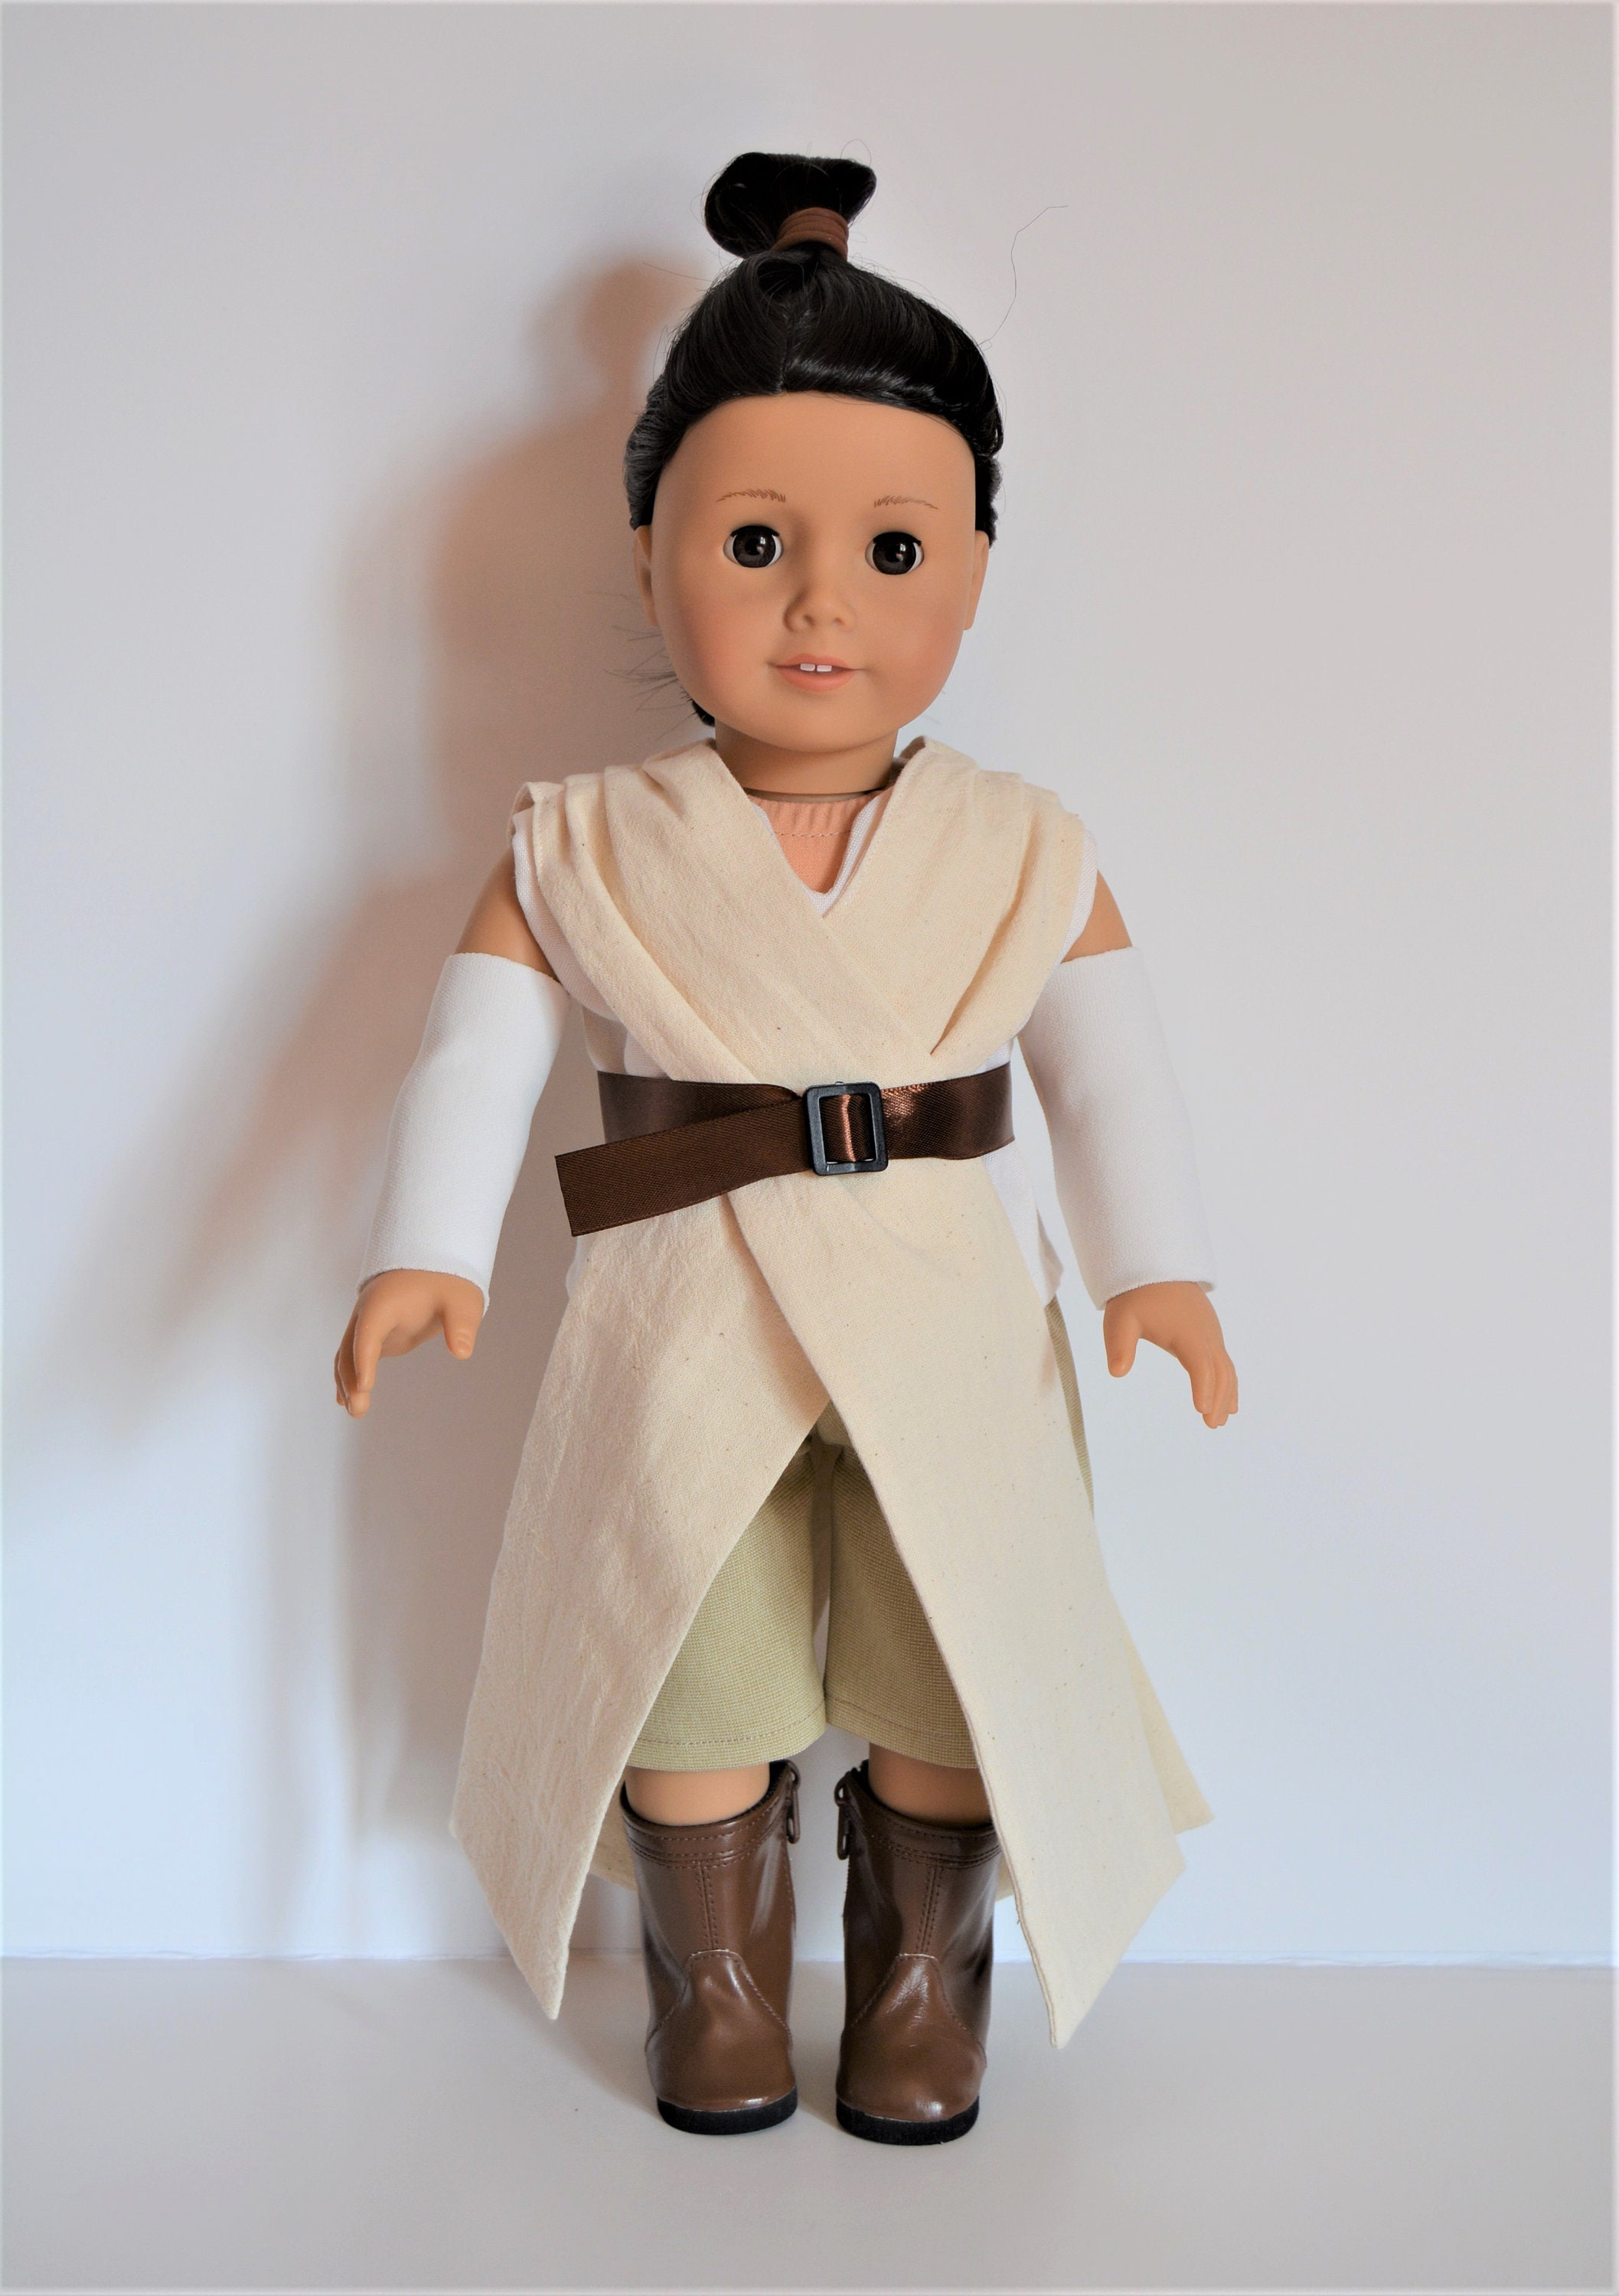 Handmade Doll Clothes Star Wars Rey Costume fit 14.5" AG Wellie Wishers Dolls 